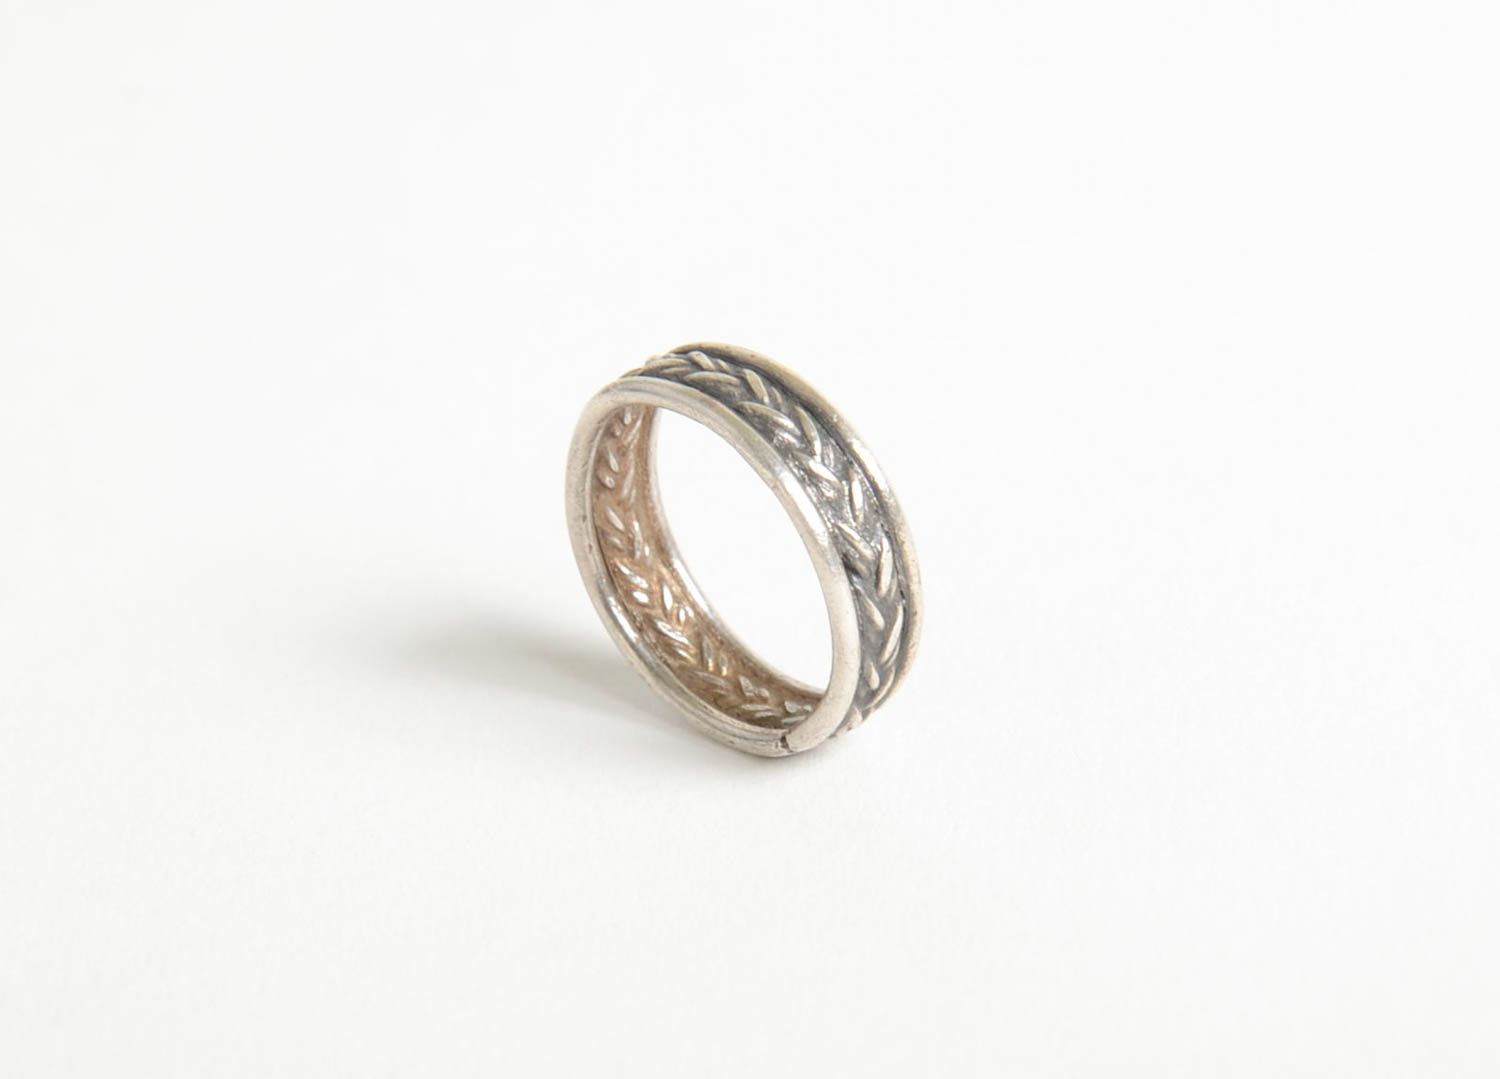 Unusual handmade metal ring seal ring design fashion trends gifts for her photo 3